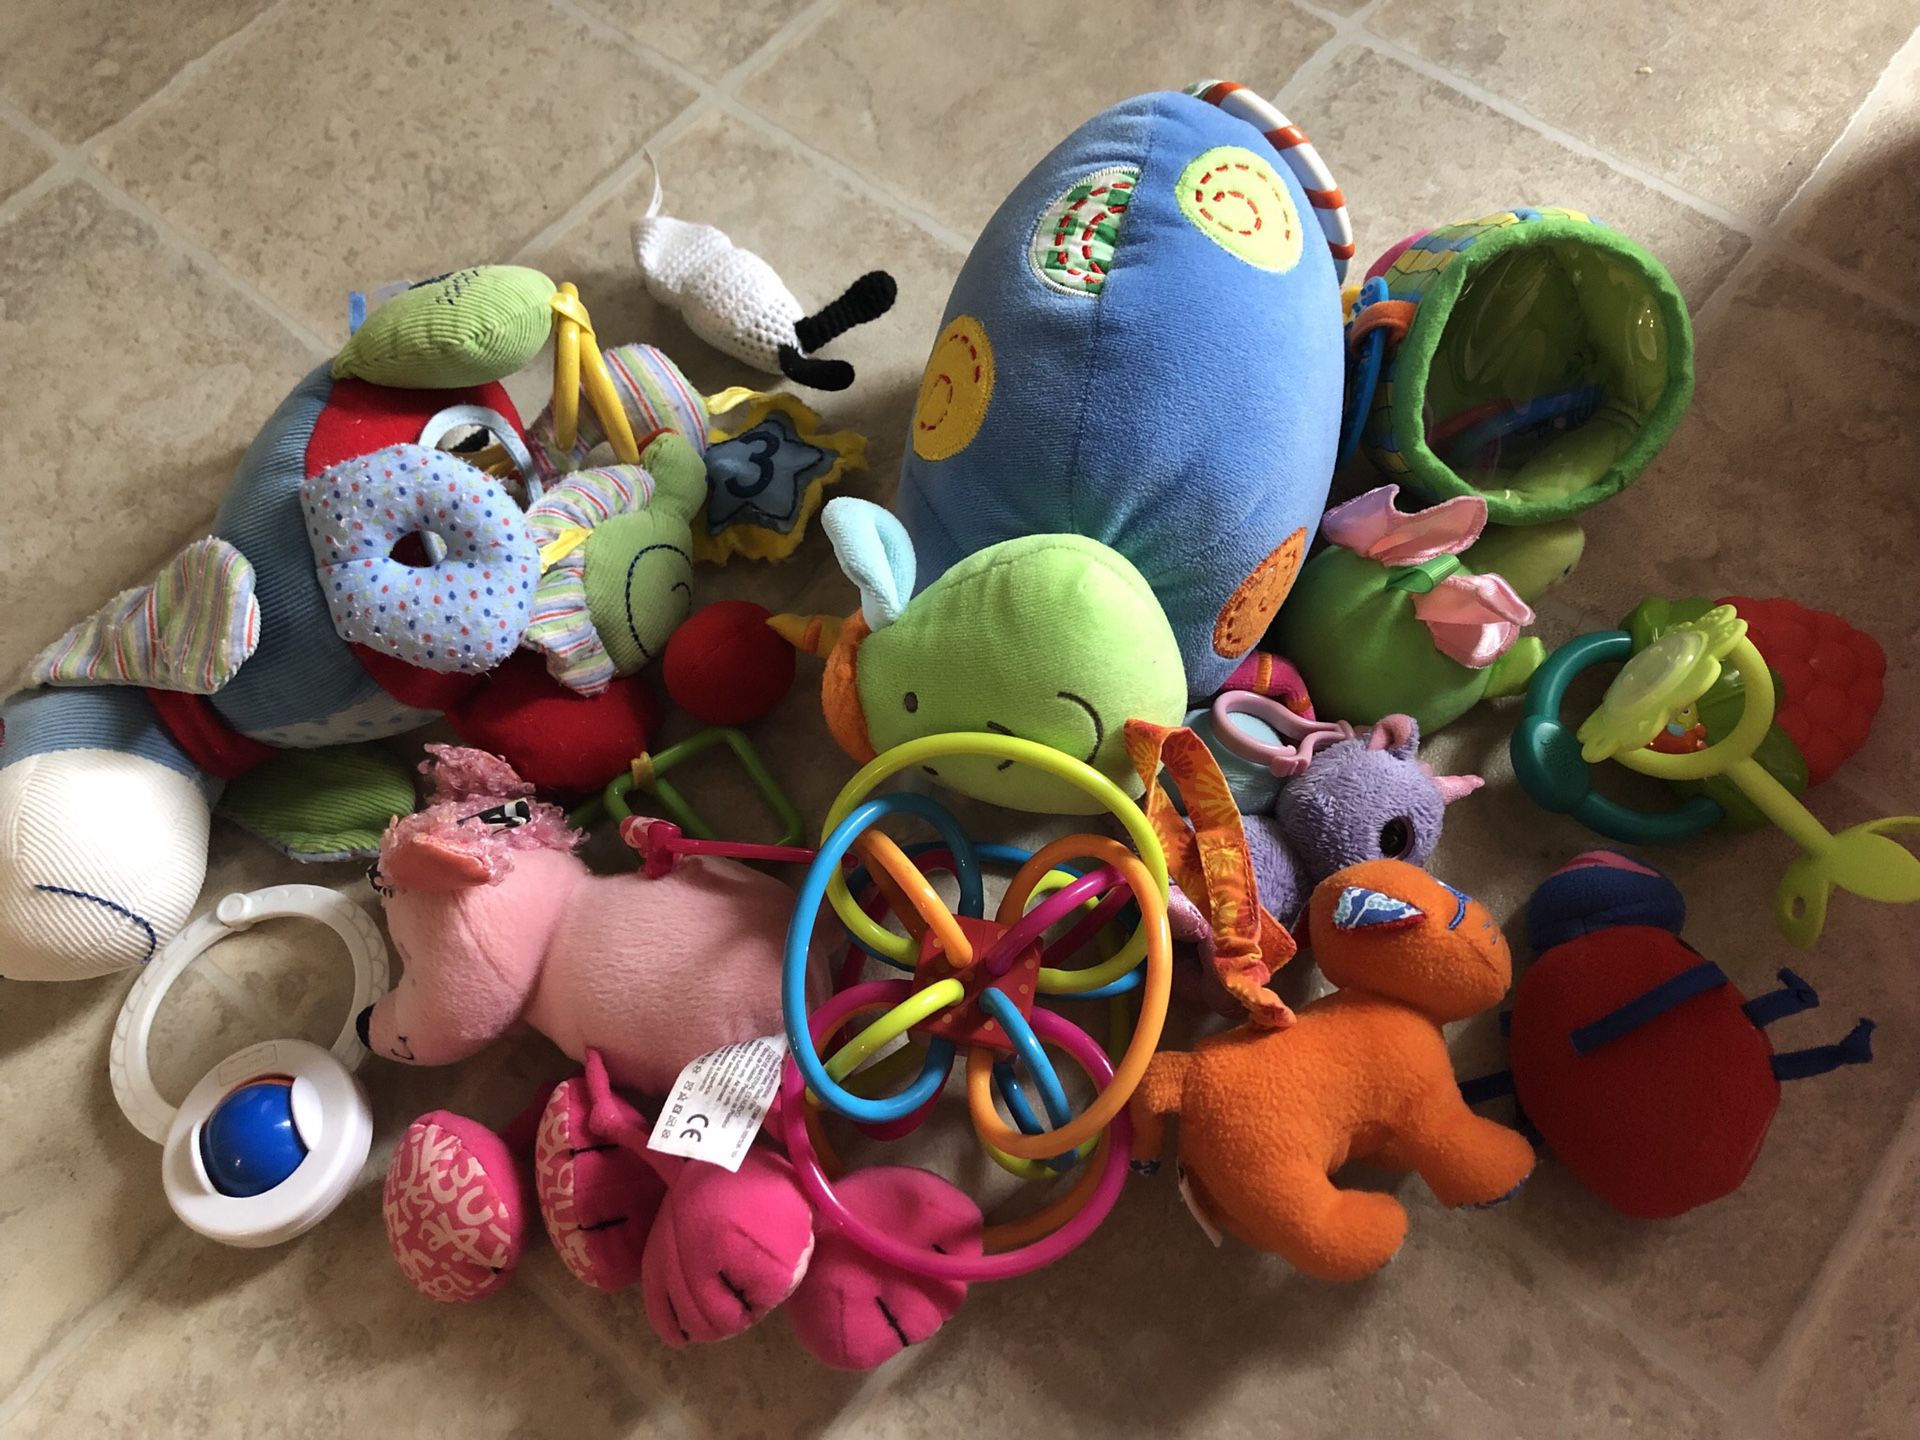 13 soft baby toys (including hanging toys for car seat)